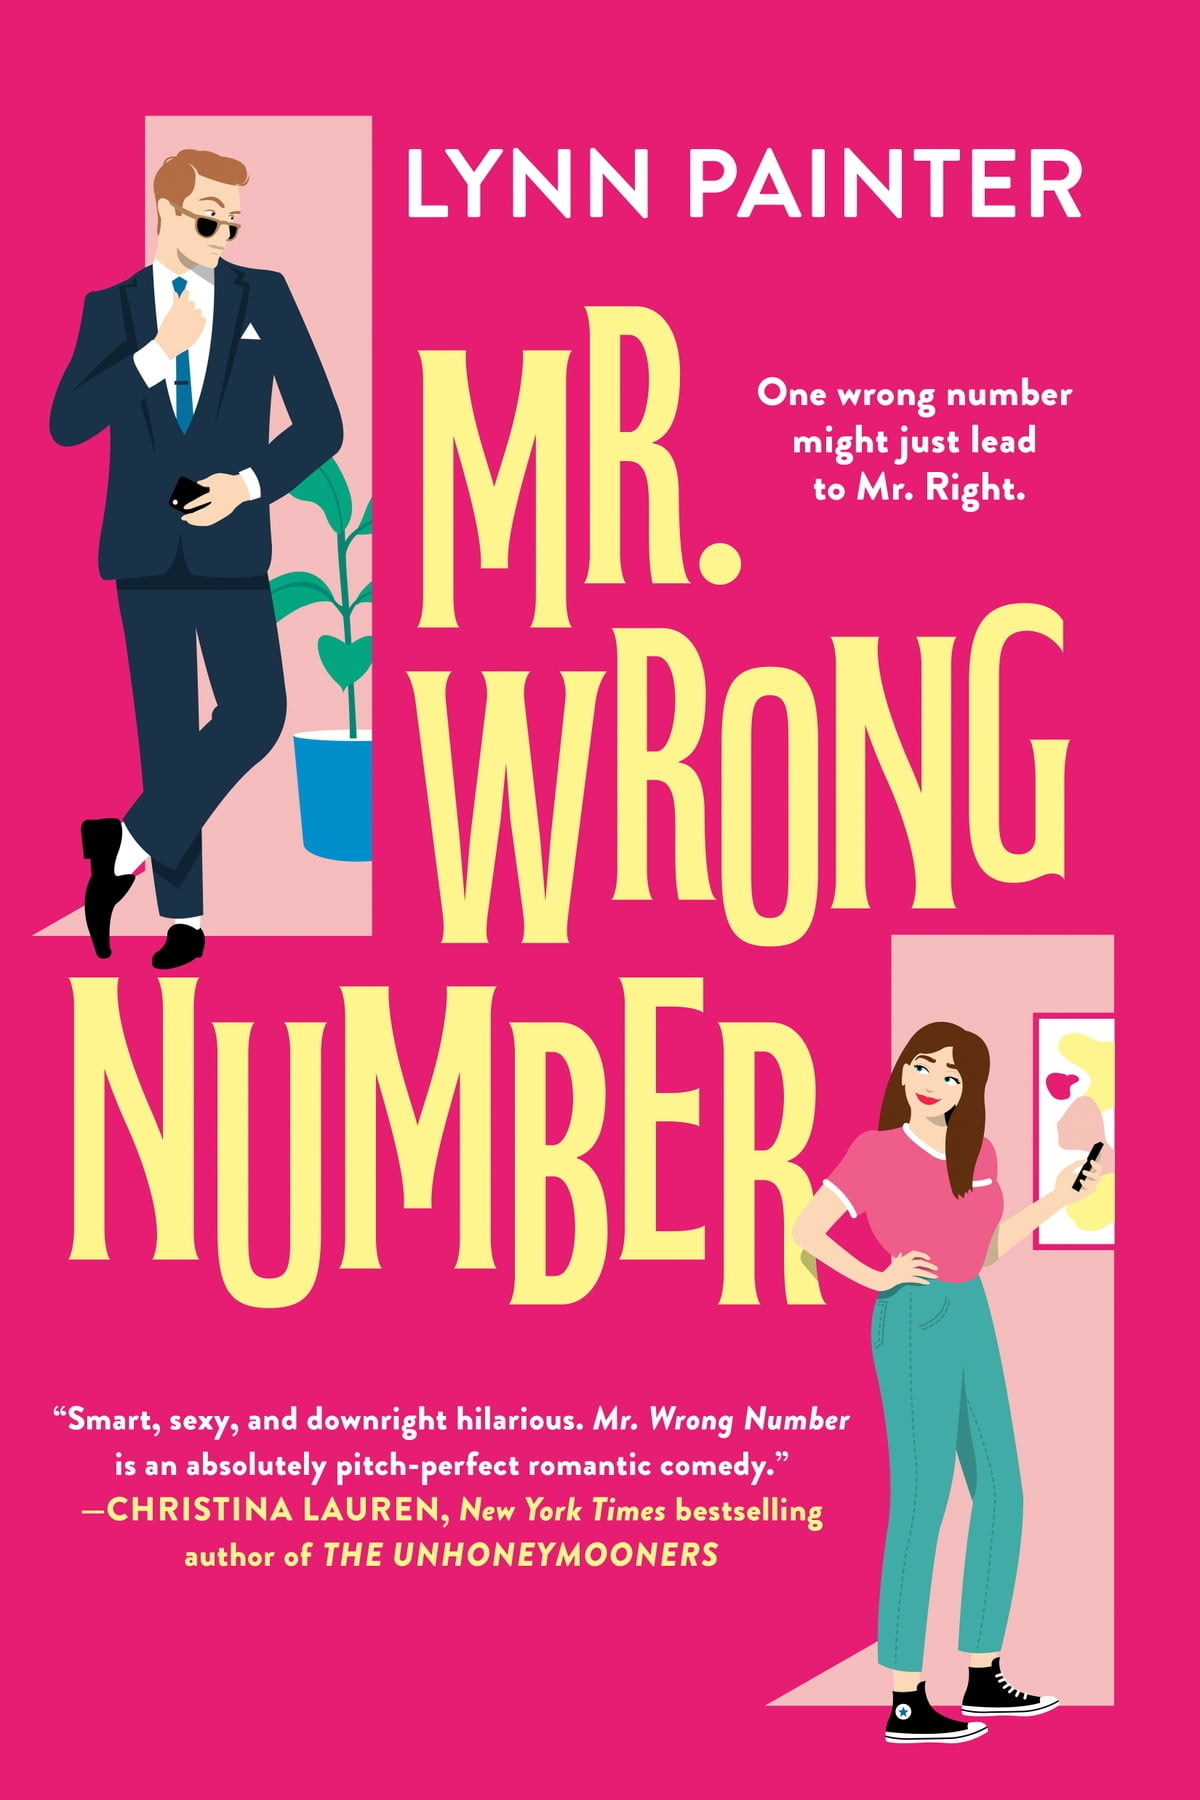 Mr. Wrong Number book cover. Book by Lynn Painter